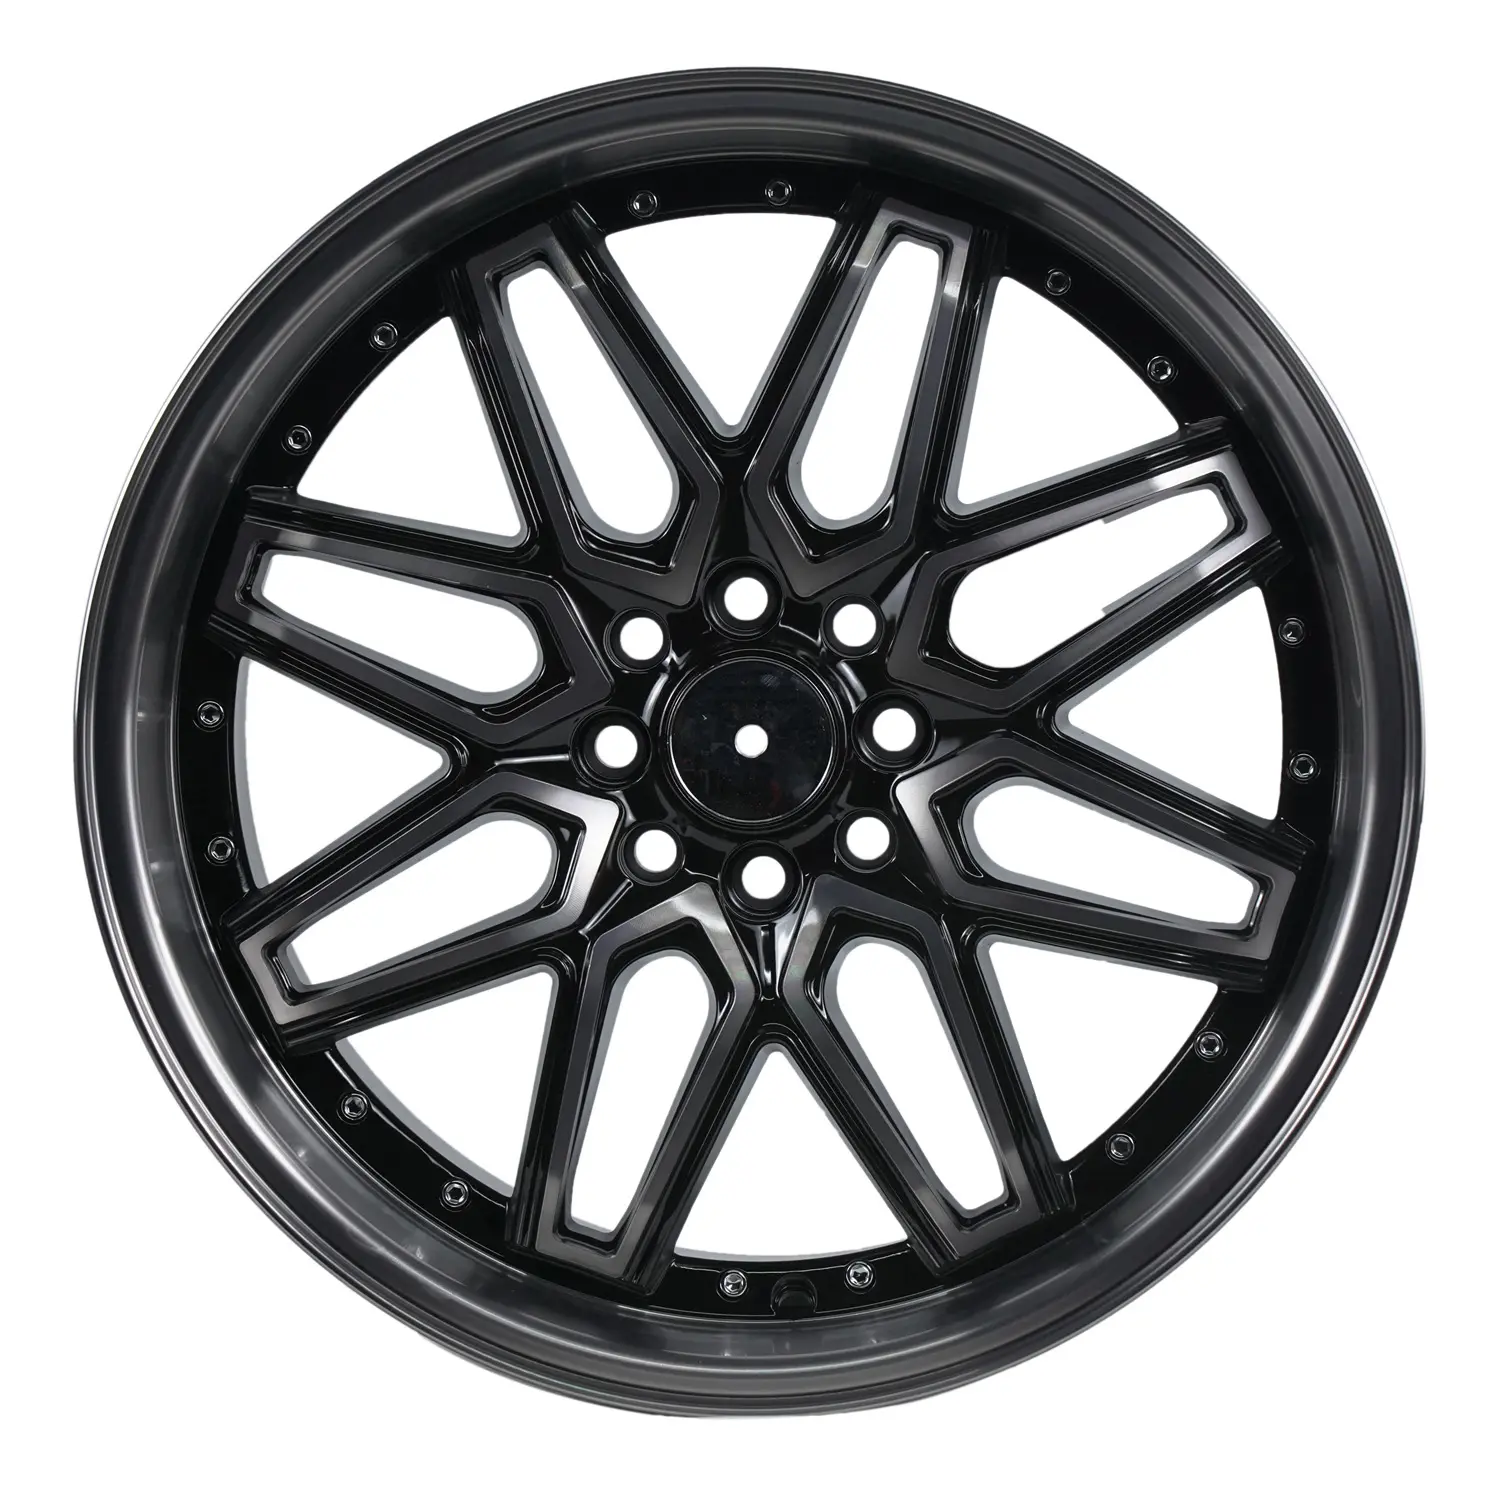 wire rims high quality 17 inch hot selling casting aluminum alloy wheels car rims 100 114.3 pcd wire spokes hoops